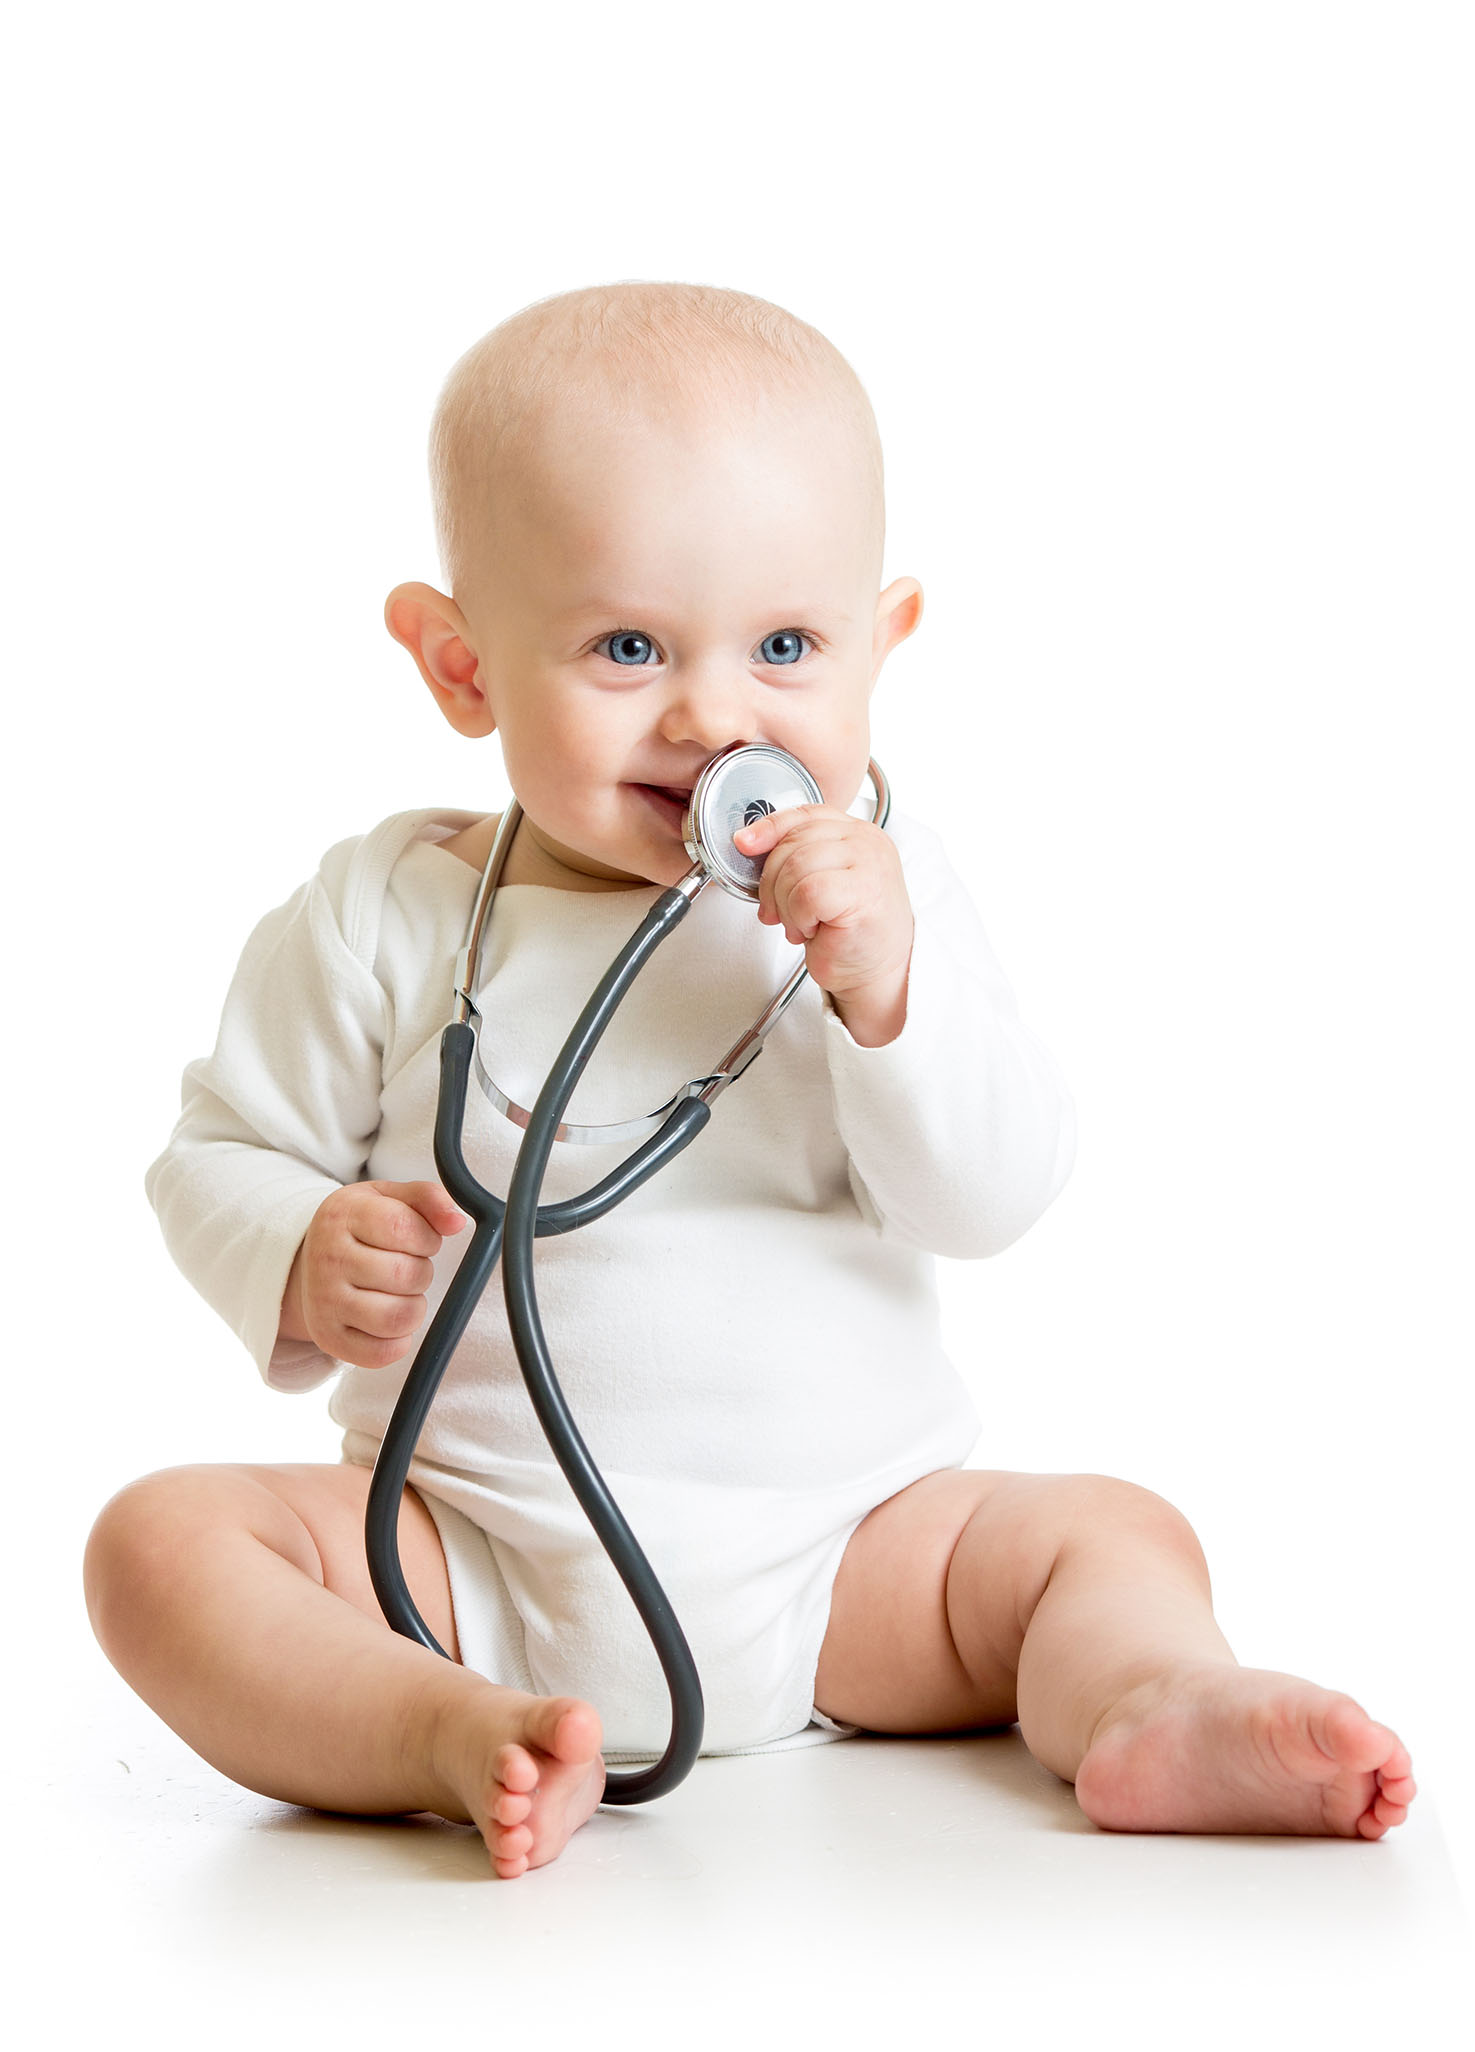 Baby with a stethoscope